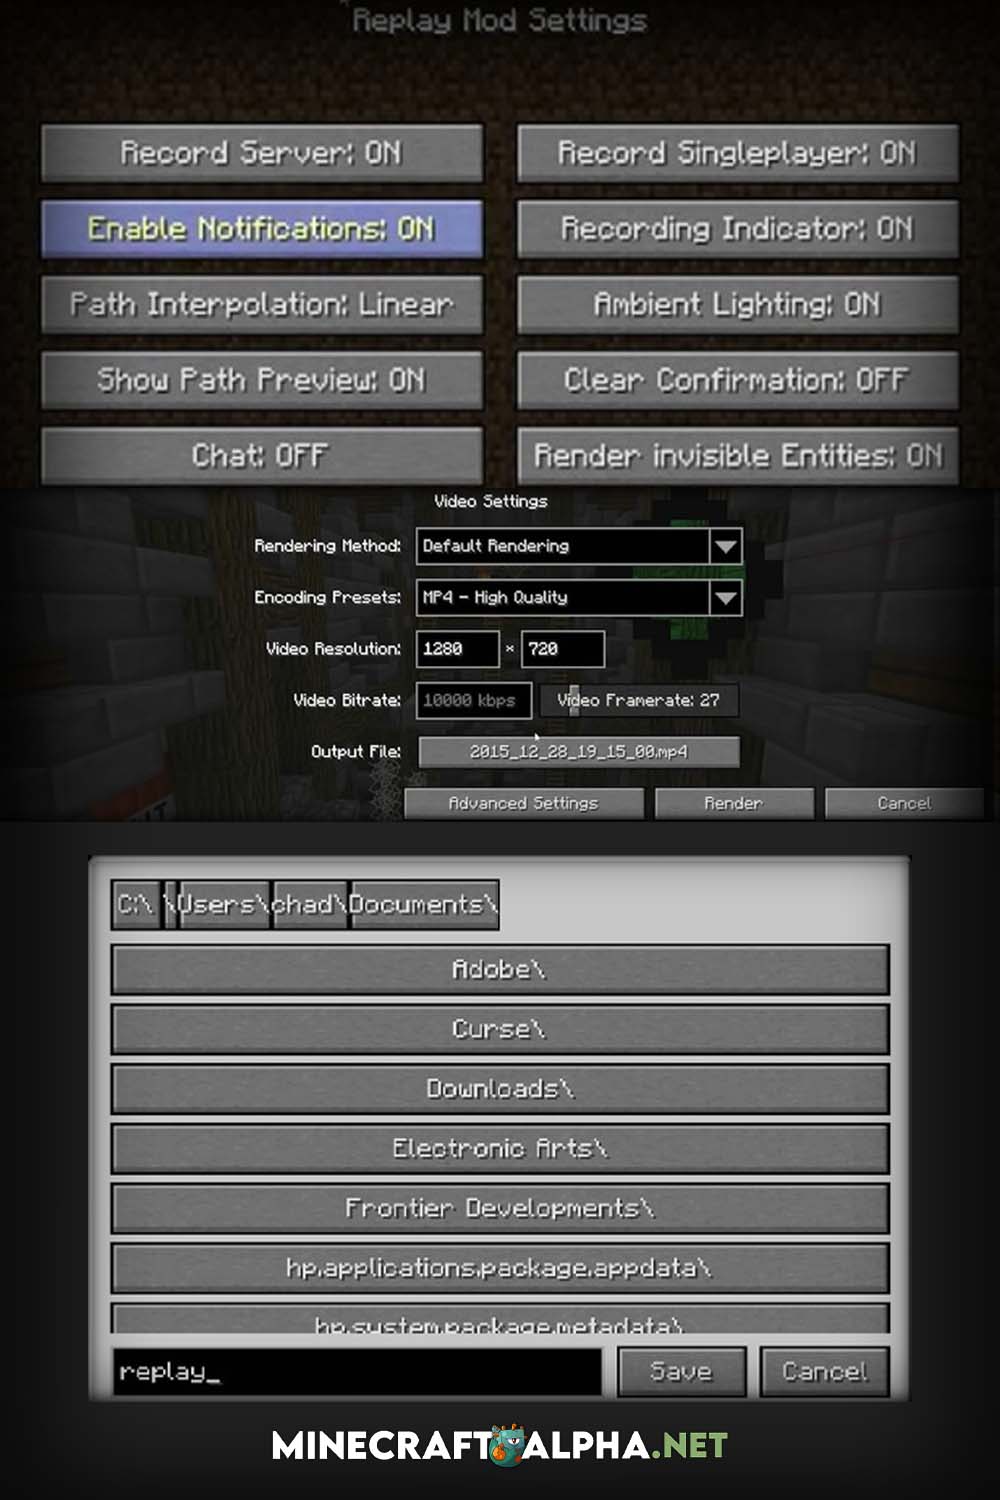 Minecraft Replay Mod 1.19, 1.18.2, 1.17.1 (Record, Relive, Share Your Experience)